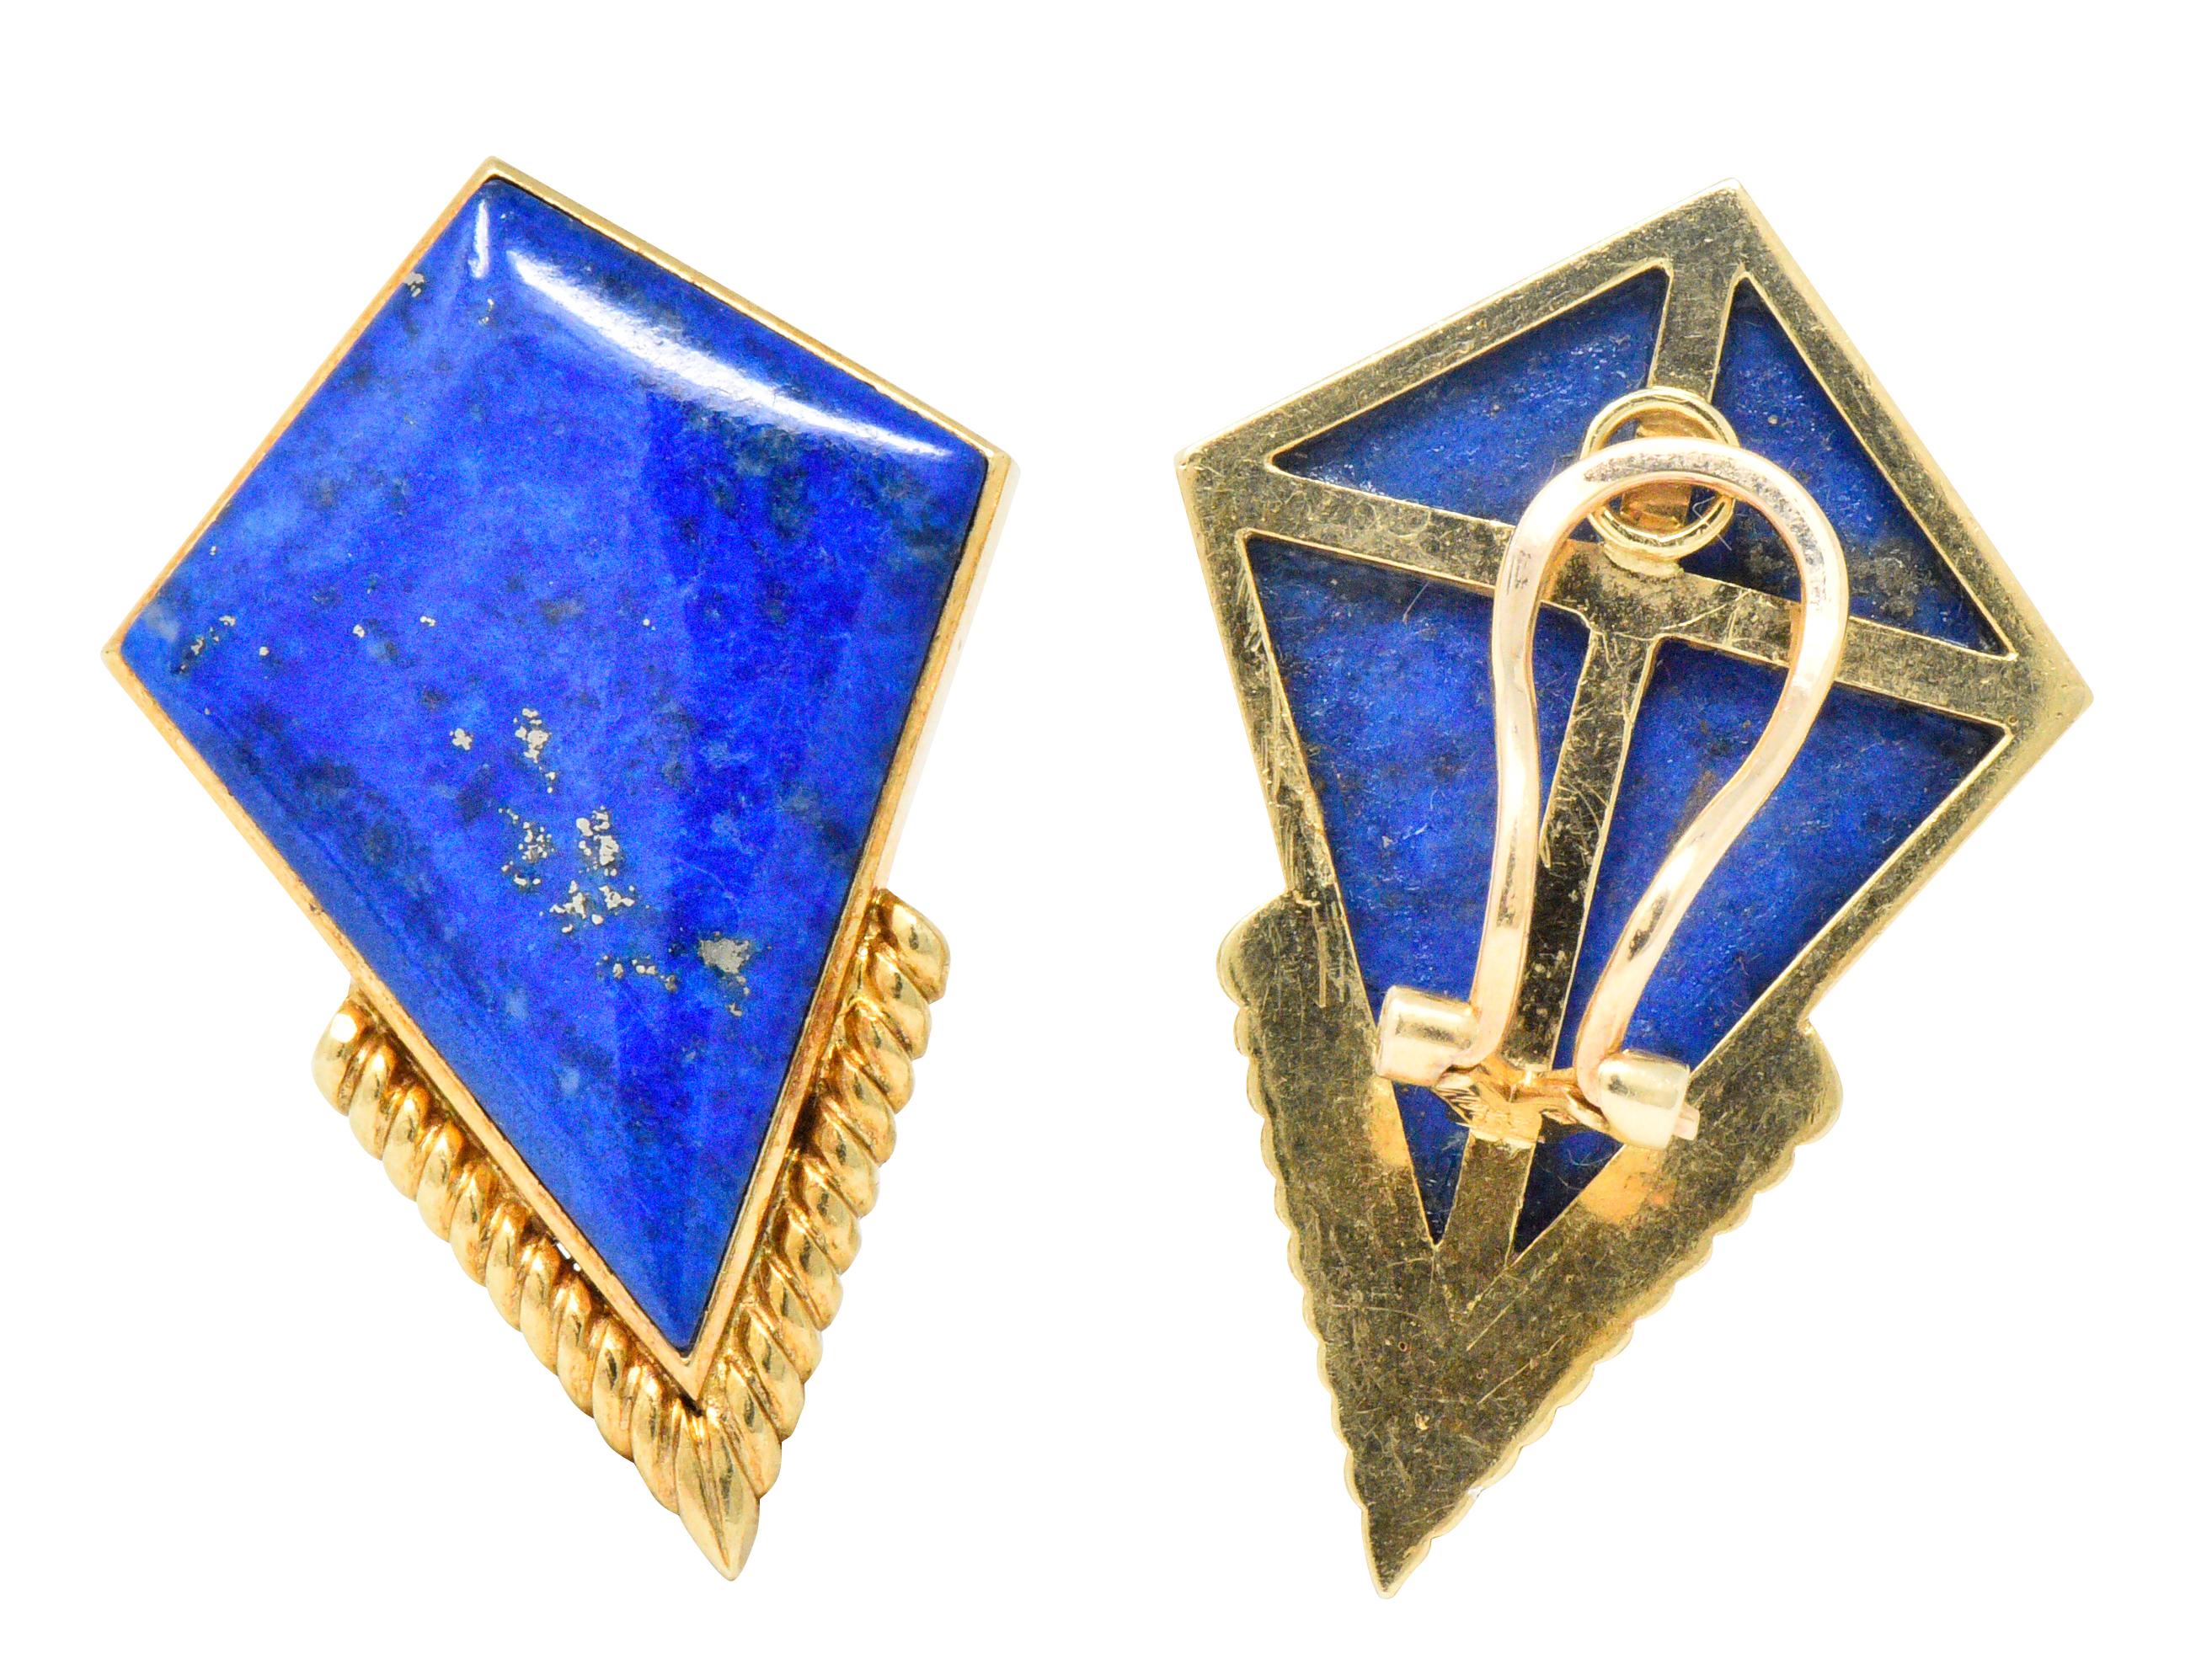 Shield contains polished lapis lazuli, bright blue with some dark blue veining and flecks of pyrite

Accented with polished fluted gold

Bright bold statement ear-clips 

Fully signed Ming's with hinged omega backs

Measures: Approx. 1 1/2 x 1